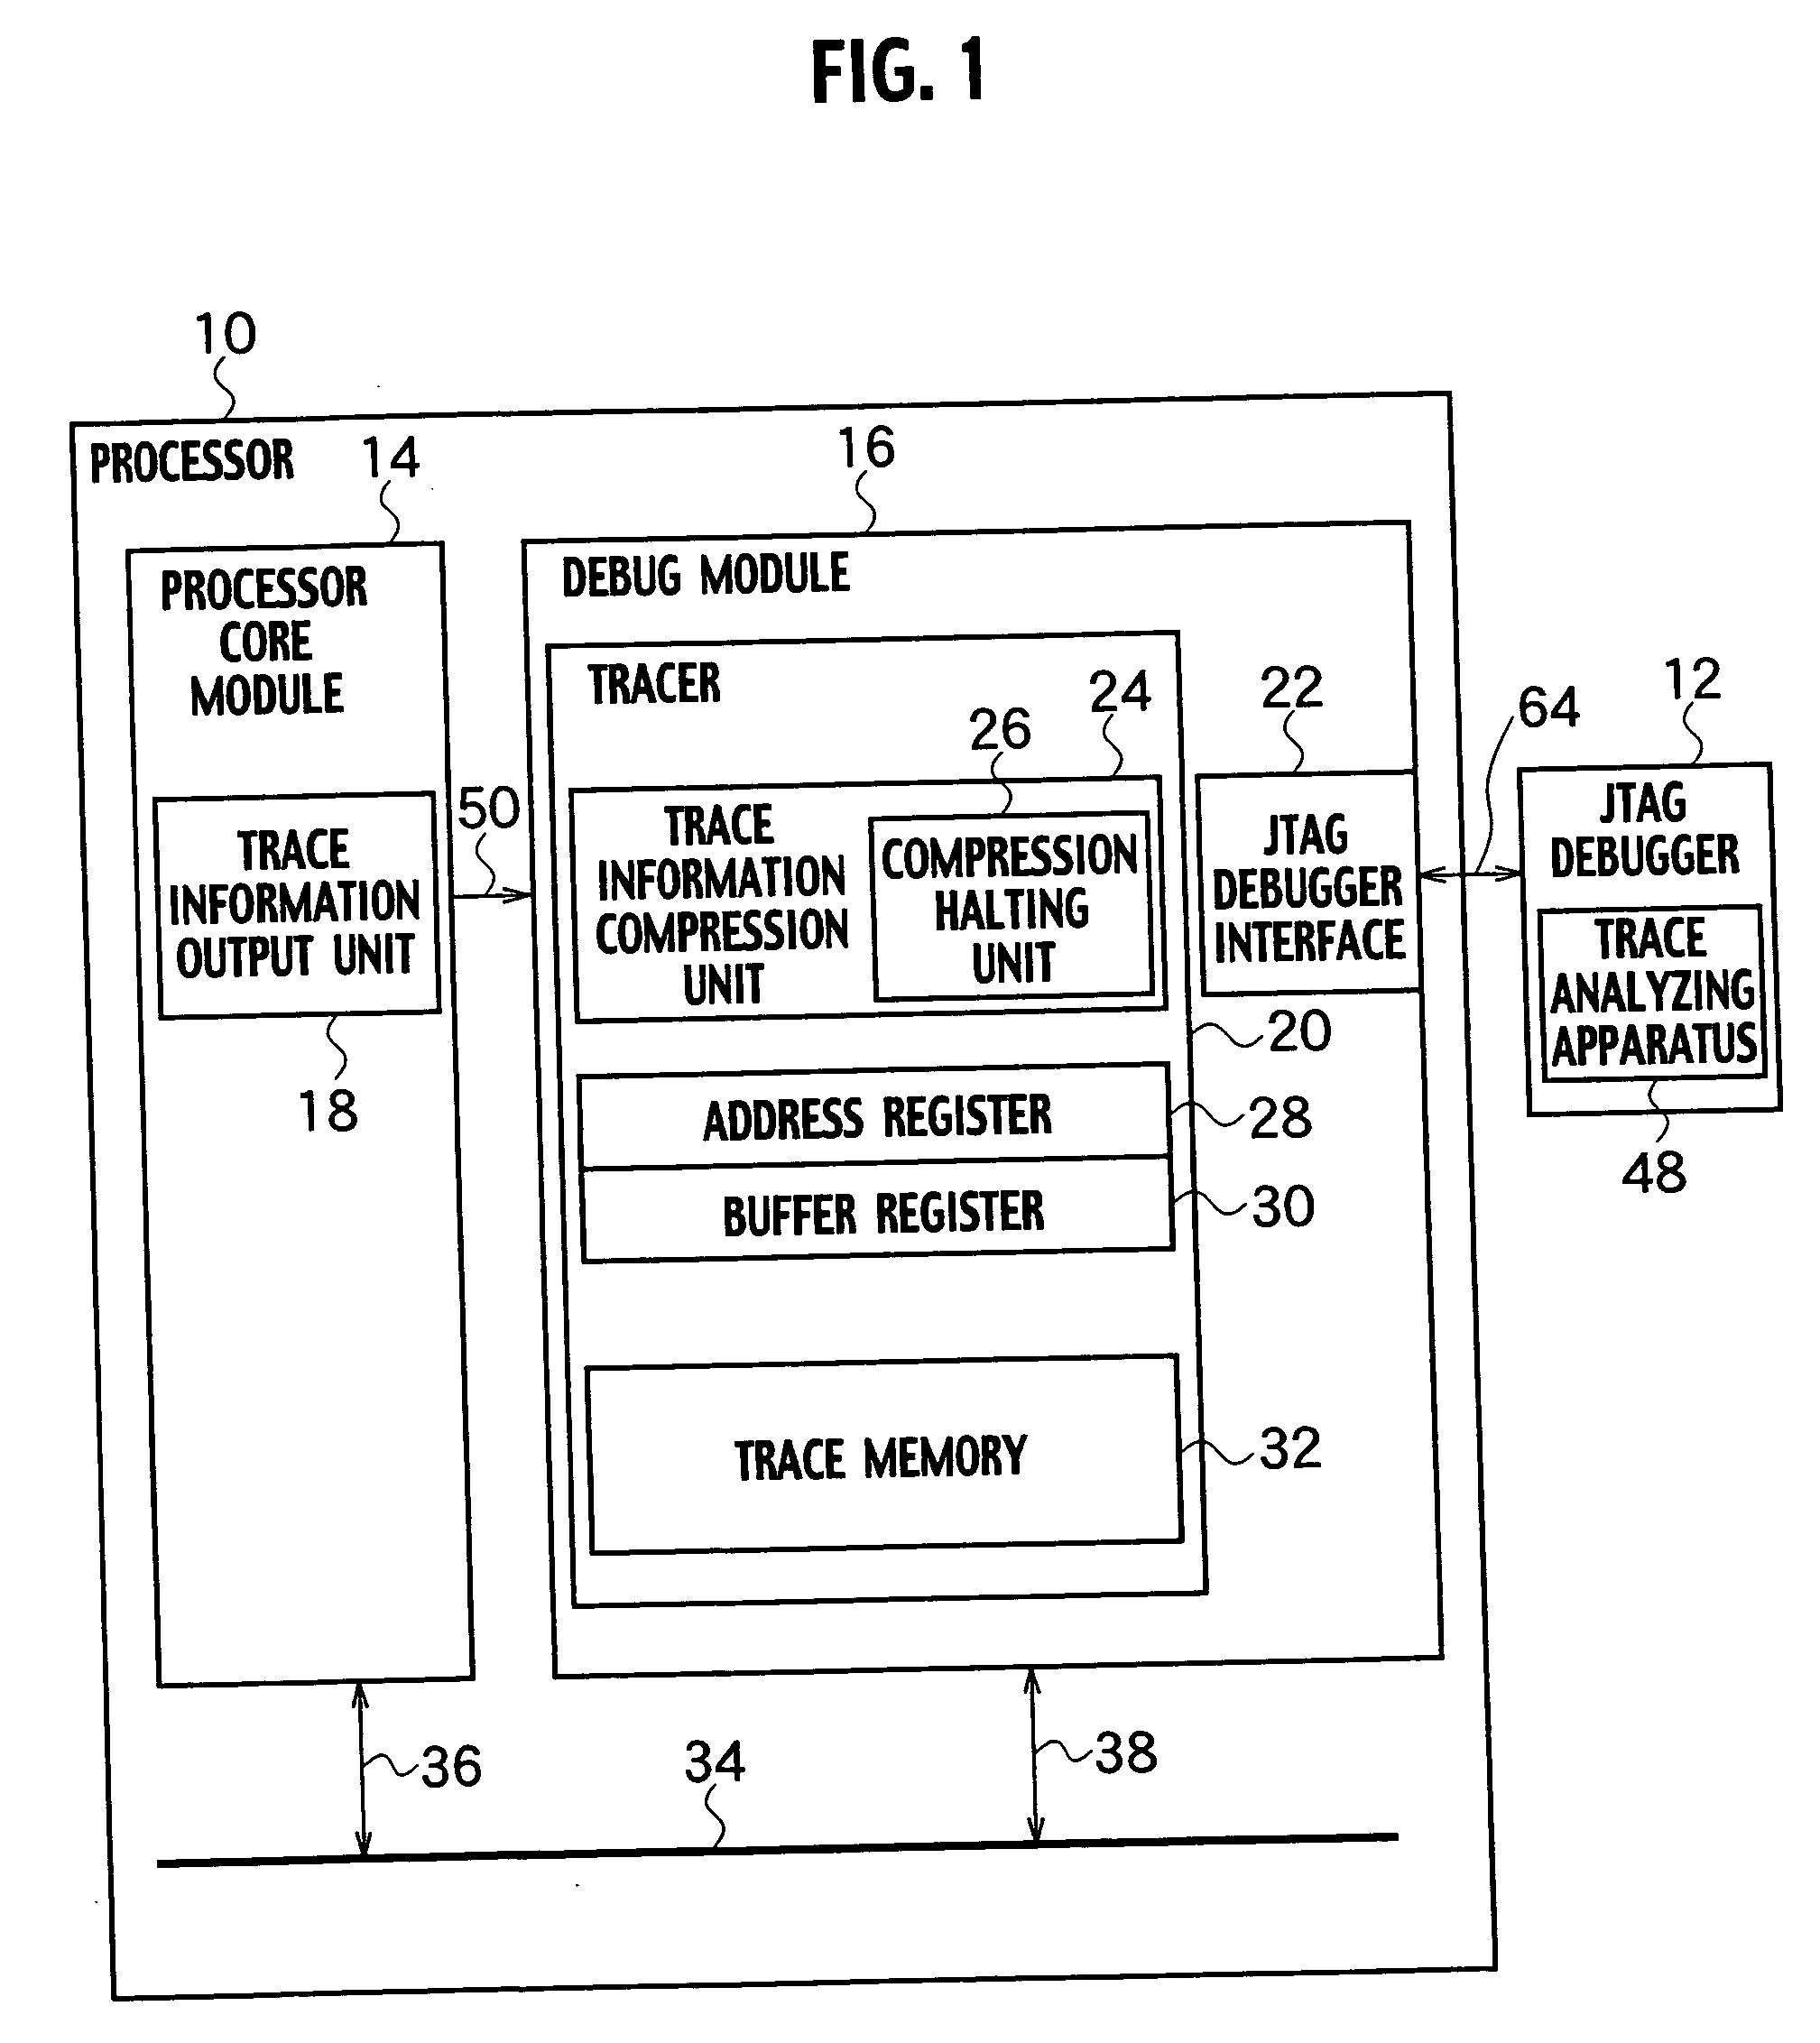 Trace analyzing apparatus, trace analyzing method, and processor